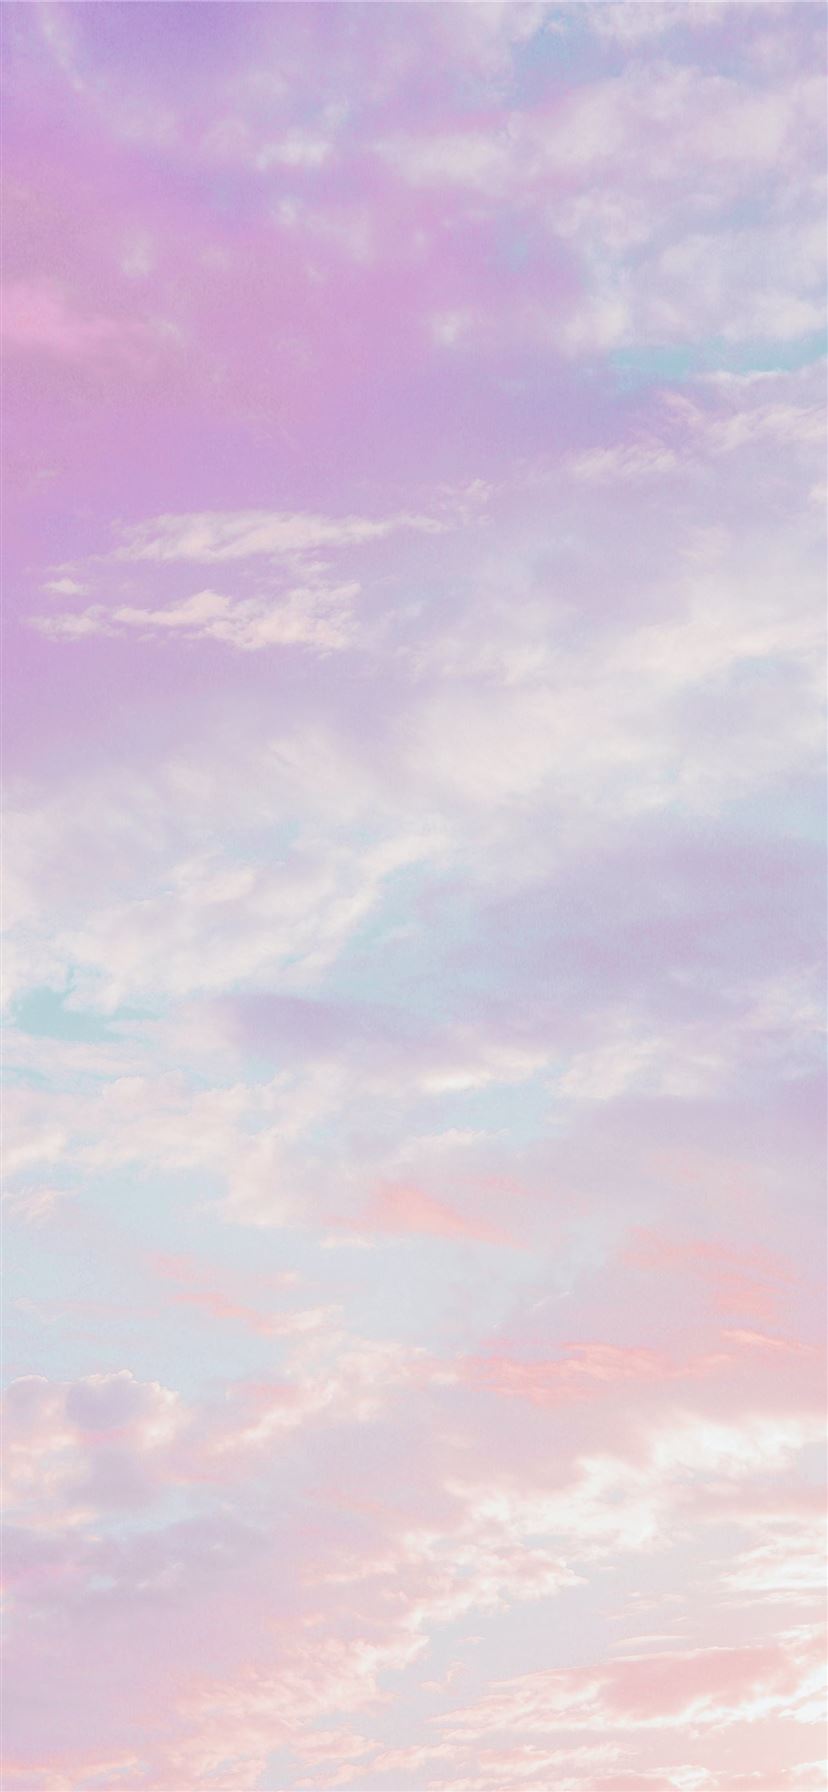 Sunset and clouds wallpapers for iPhone 6 and iPhone 6 Plus